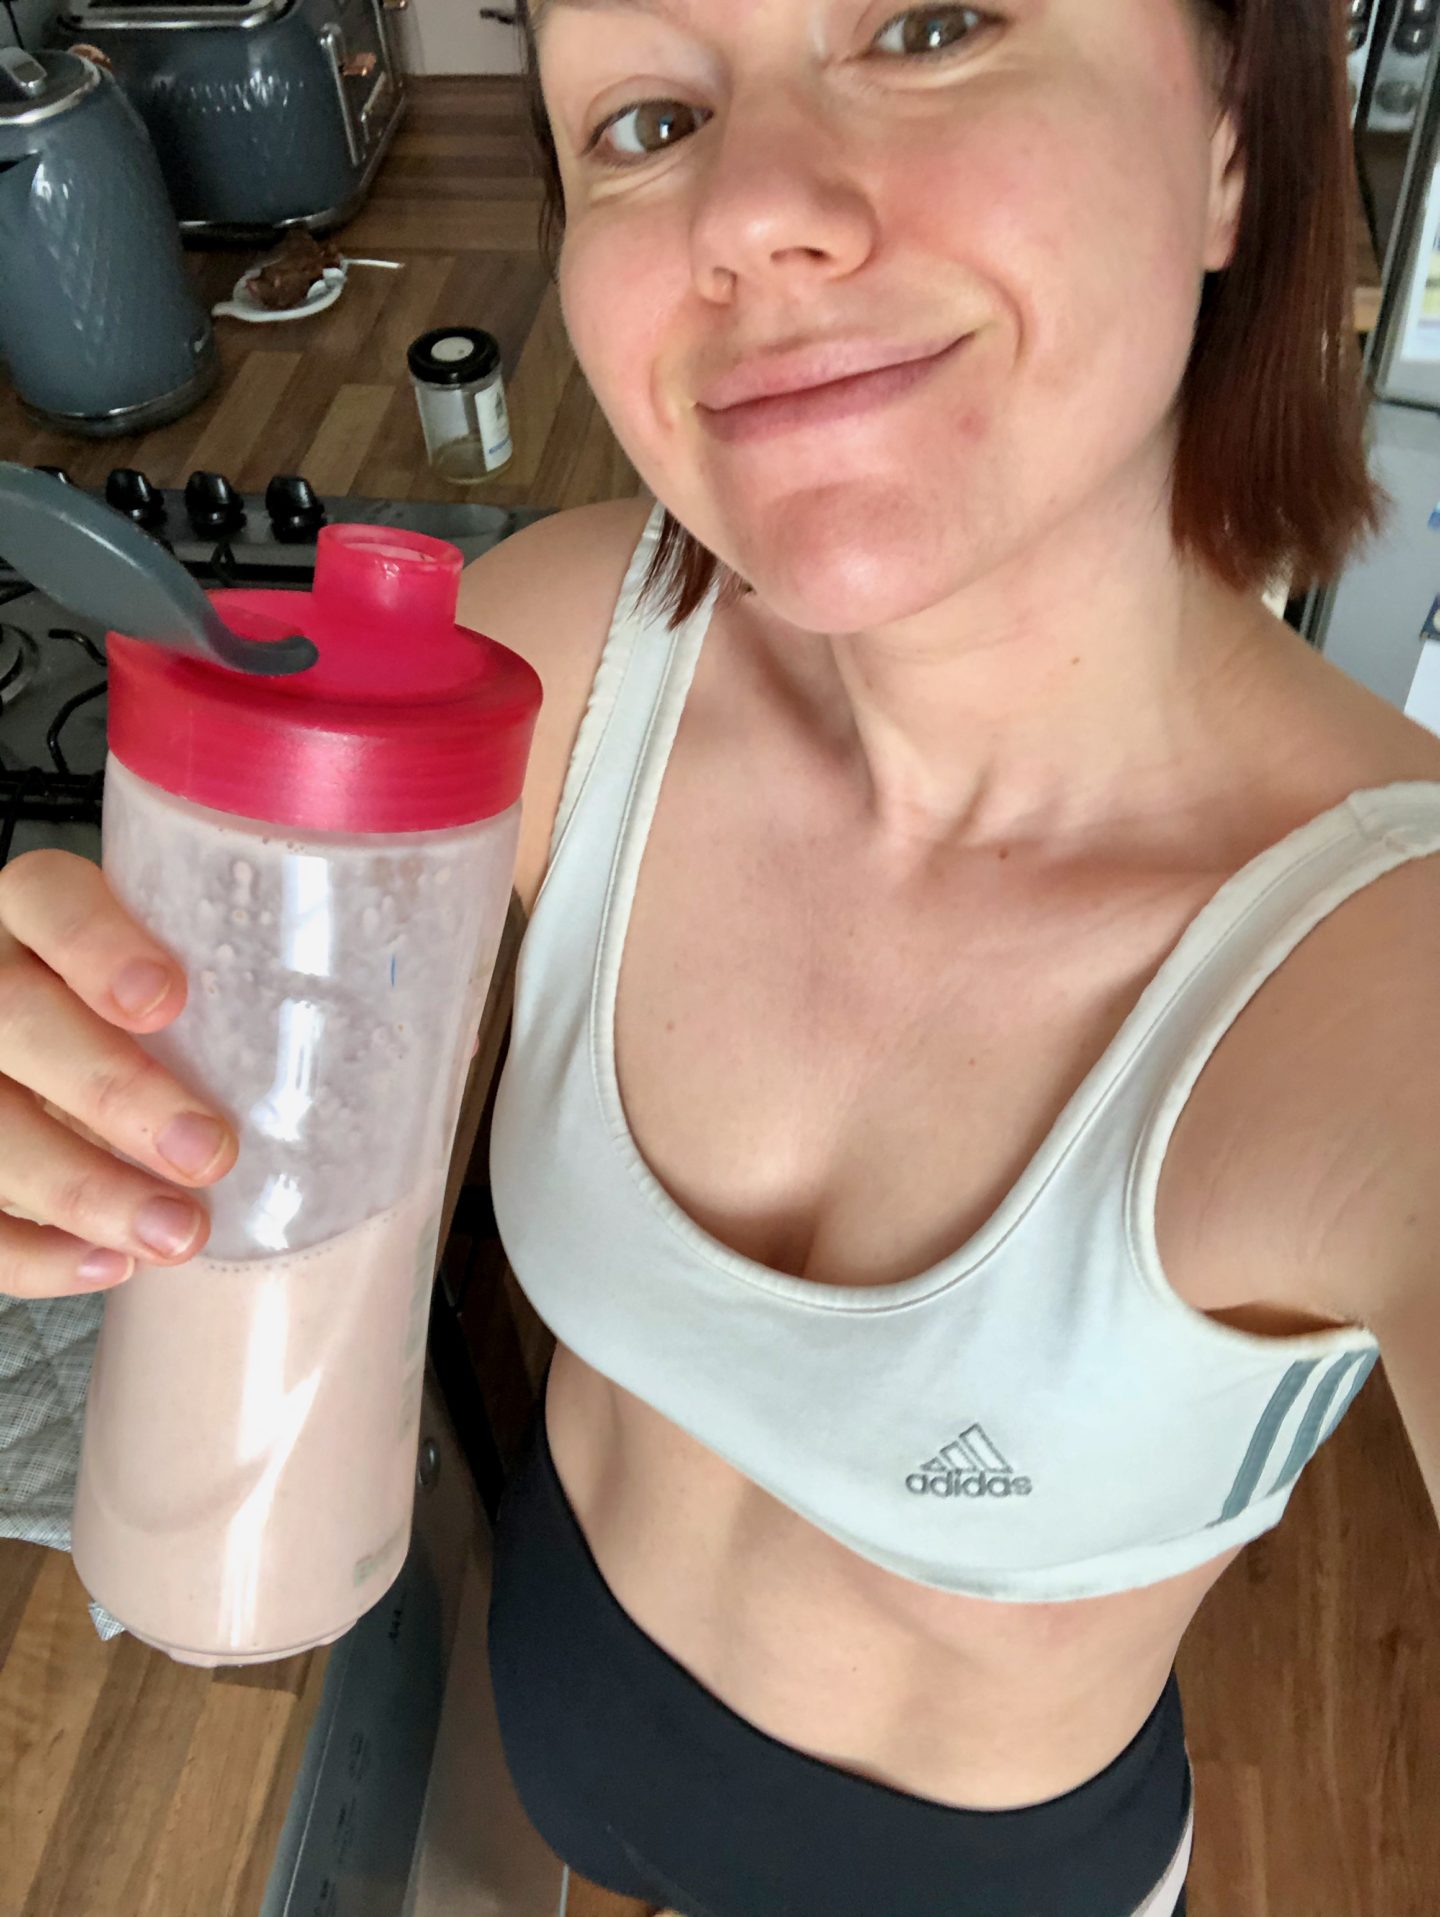 Centr app review update – what is Chris Hemsworth's health and fitness lifestyle app really like when you've been doing it every day for 8 months. Enjoying a post-workout protein smoothie. 